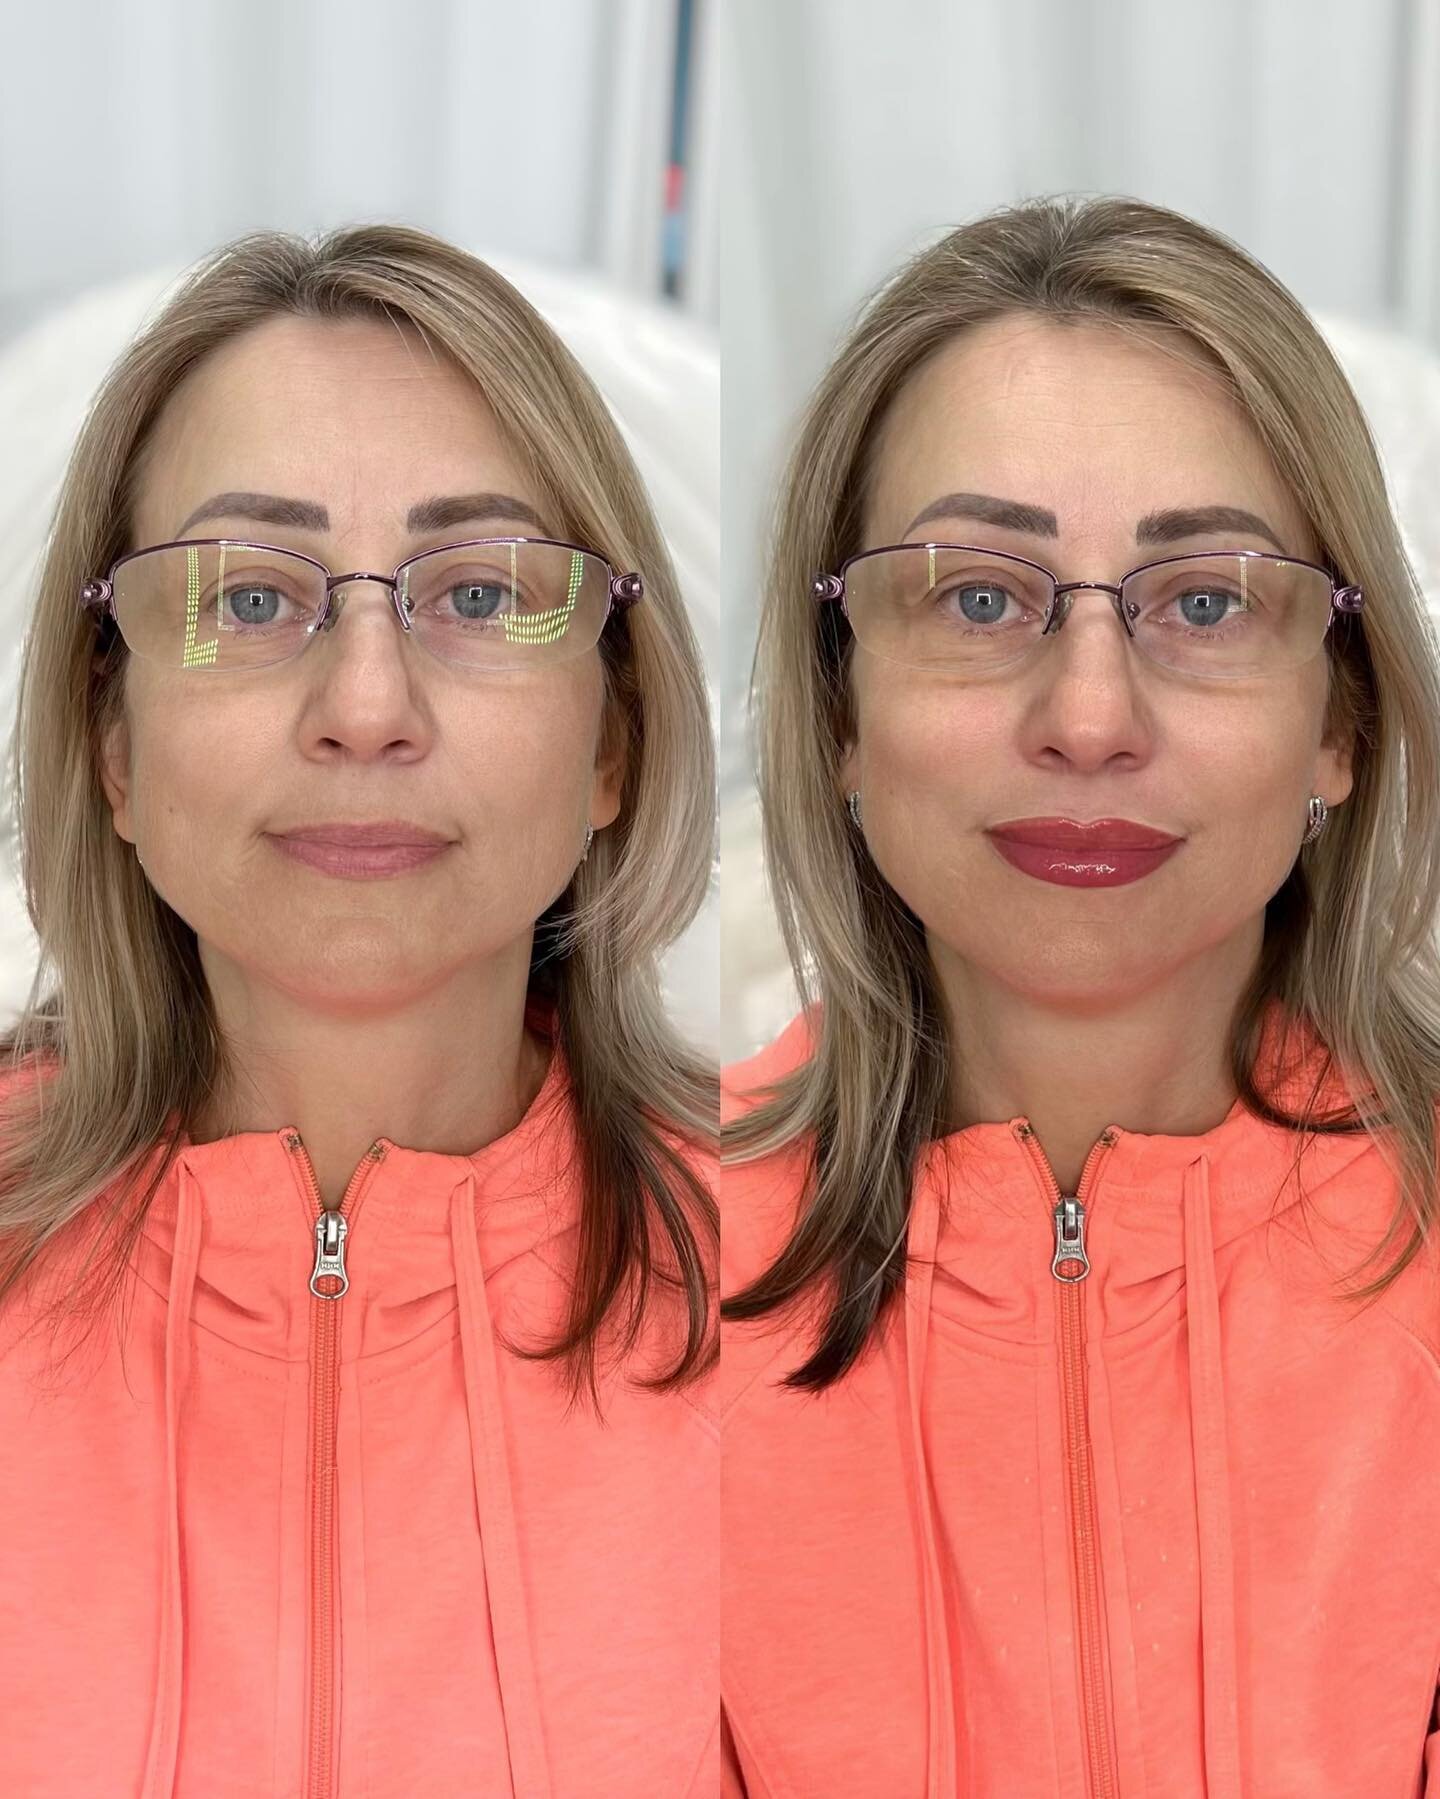 Who is ready for permanent makeup lip posts? 😜💋

We have been doing so many weekly PMU lip services and we are so excited to start broadcasting our lip beauties. 

If you are looking to have fuller, more symmetrical, and/or more color (corrective a